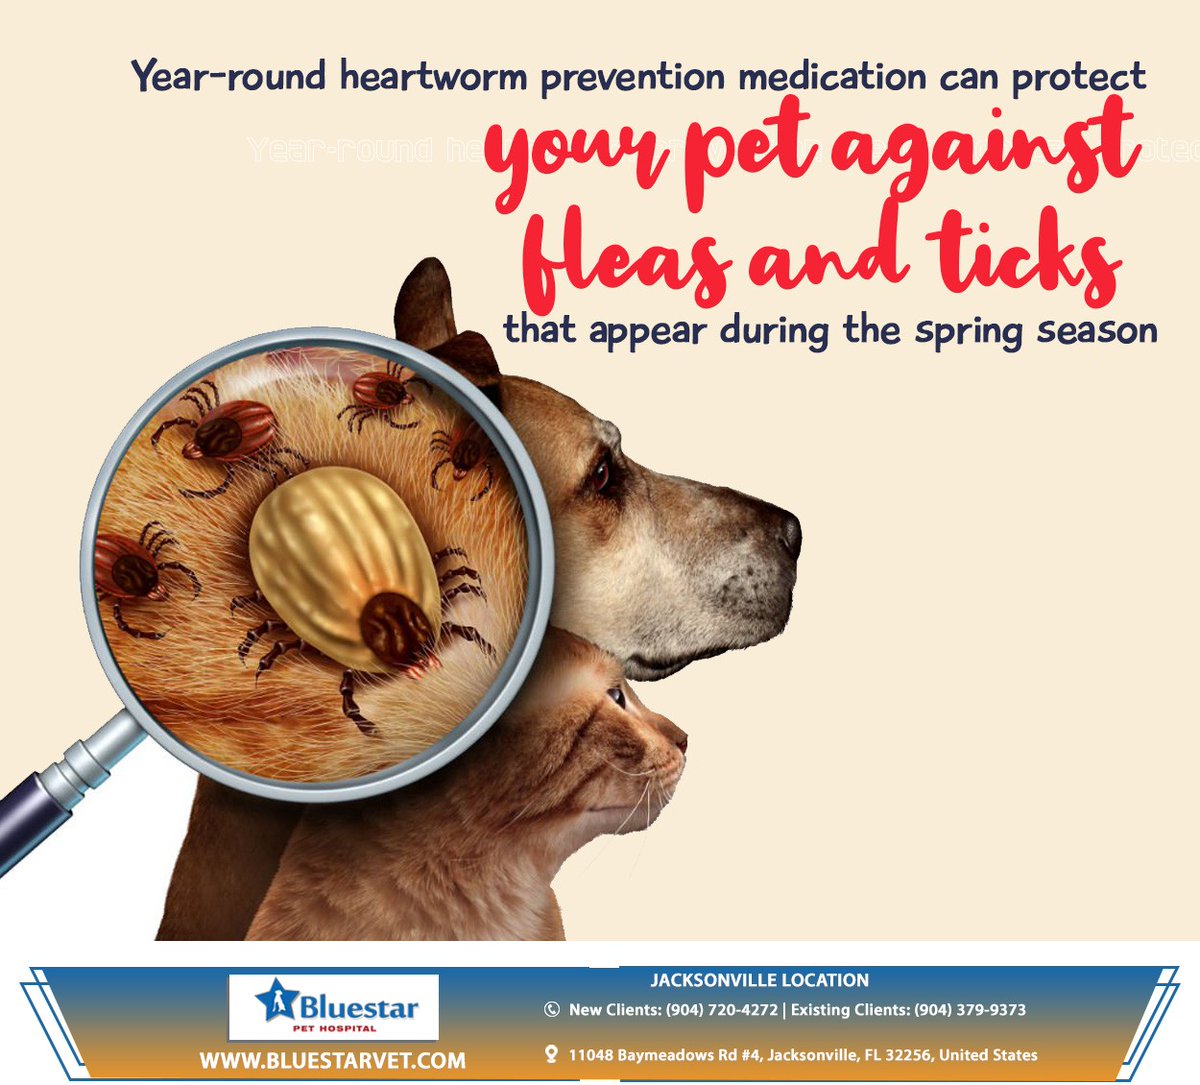 Make sure you have given your pet heartworm prevention medication to keep him or her safe this spring. Speak to your vet if you have any questions. #fleaprevention #heartworm #petcare #baymeadows #jacksonville #FL #bluestarvet